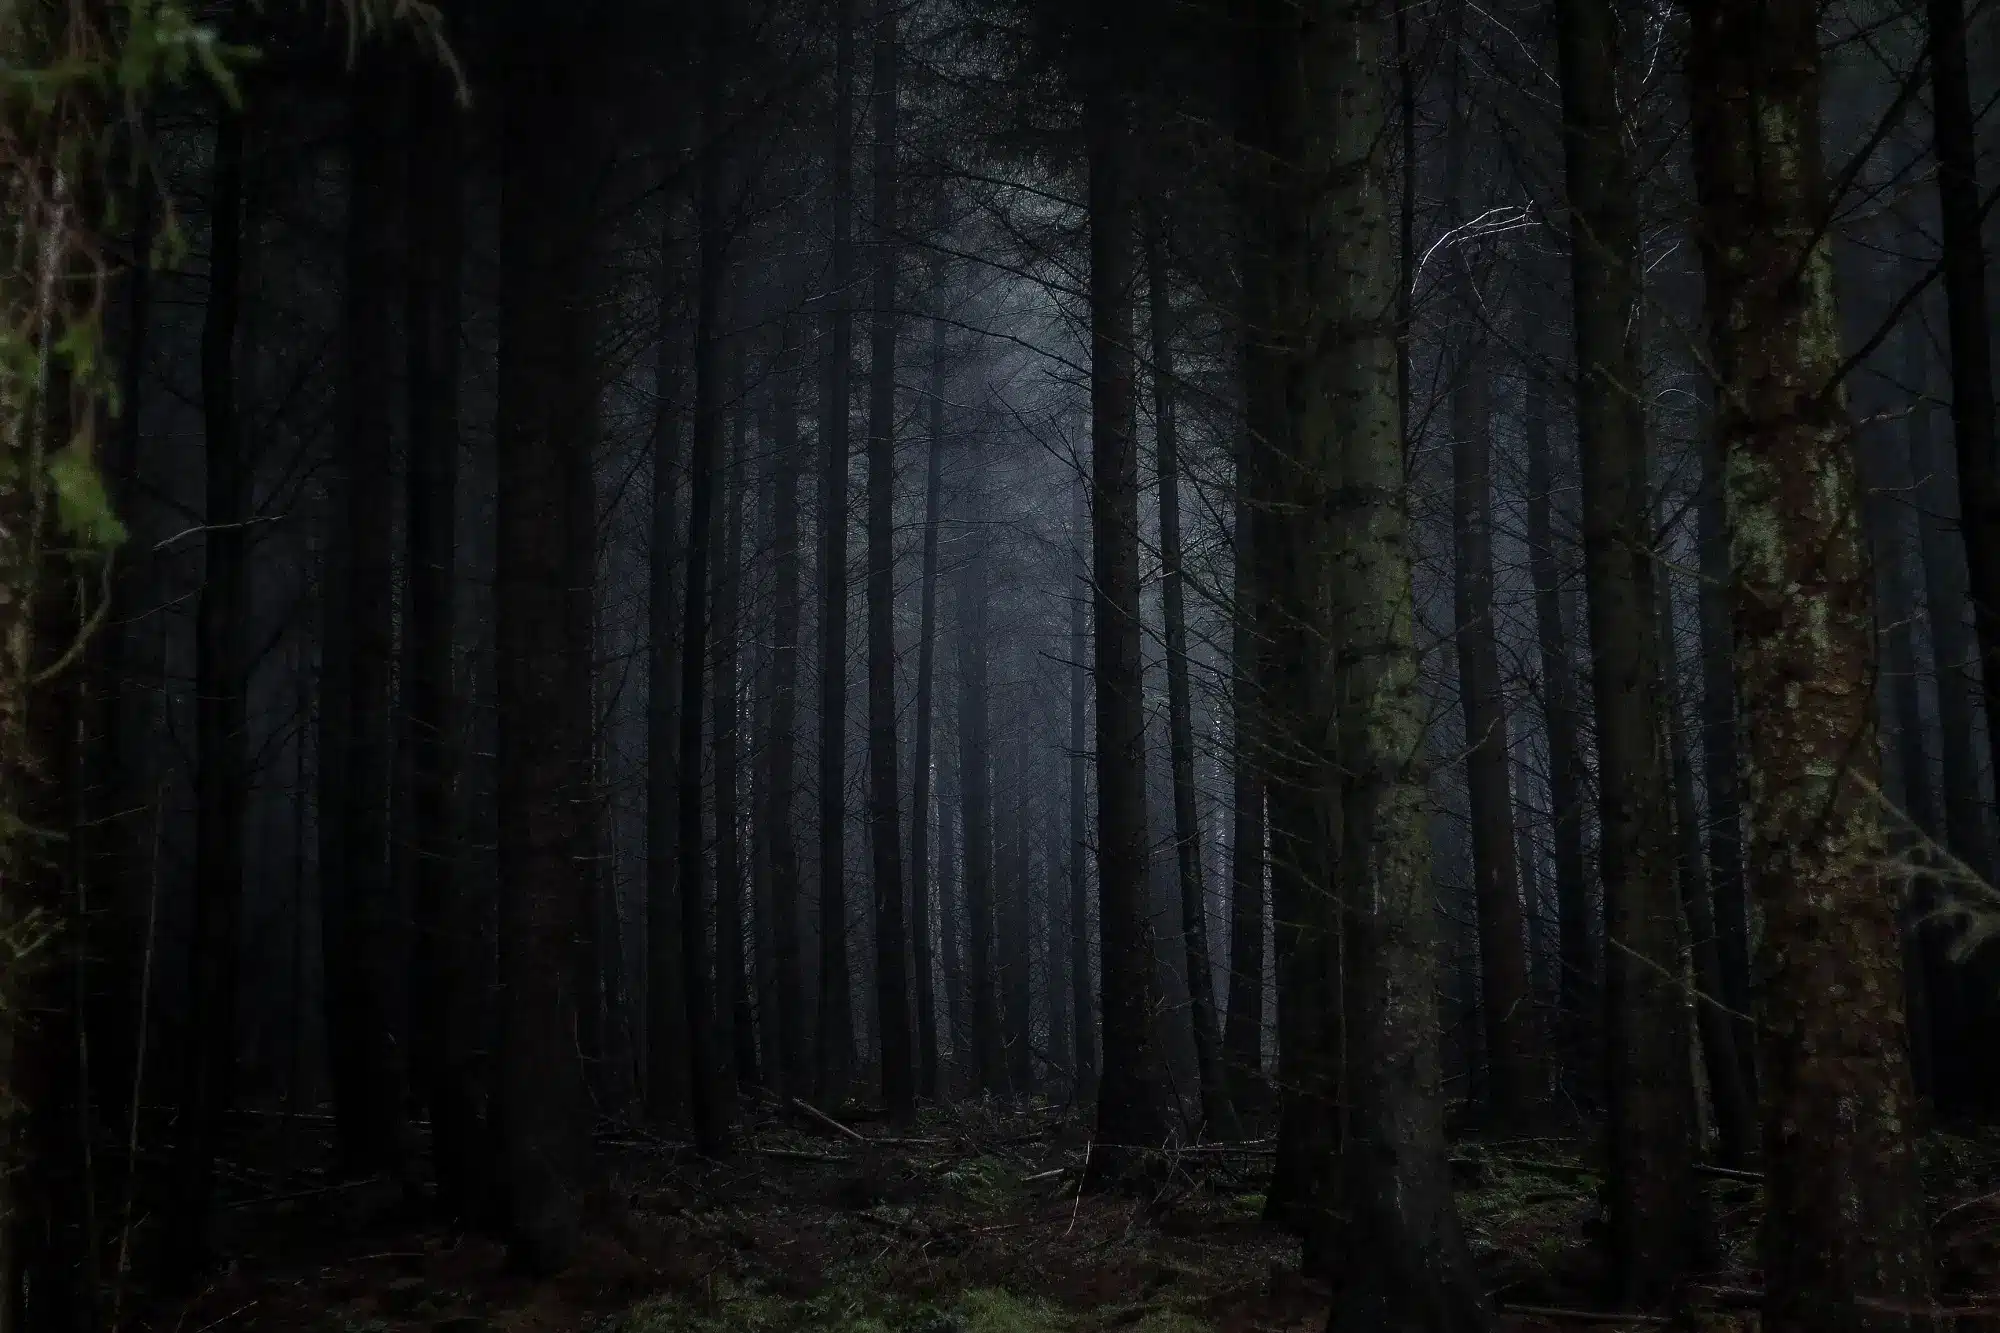 Trees in the Dalby forest in Yorkshire.